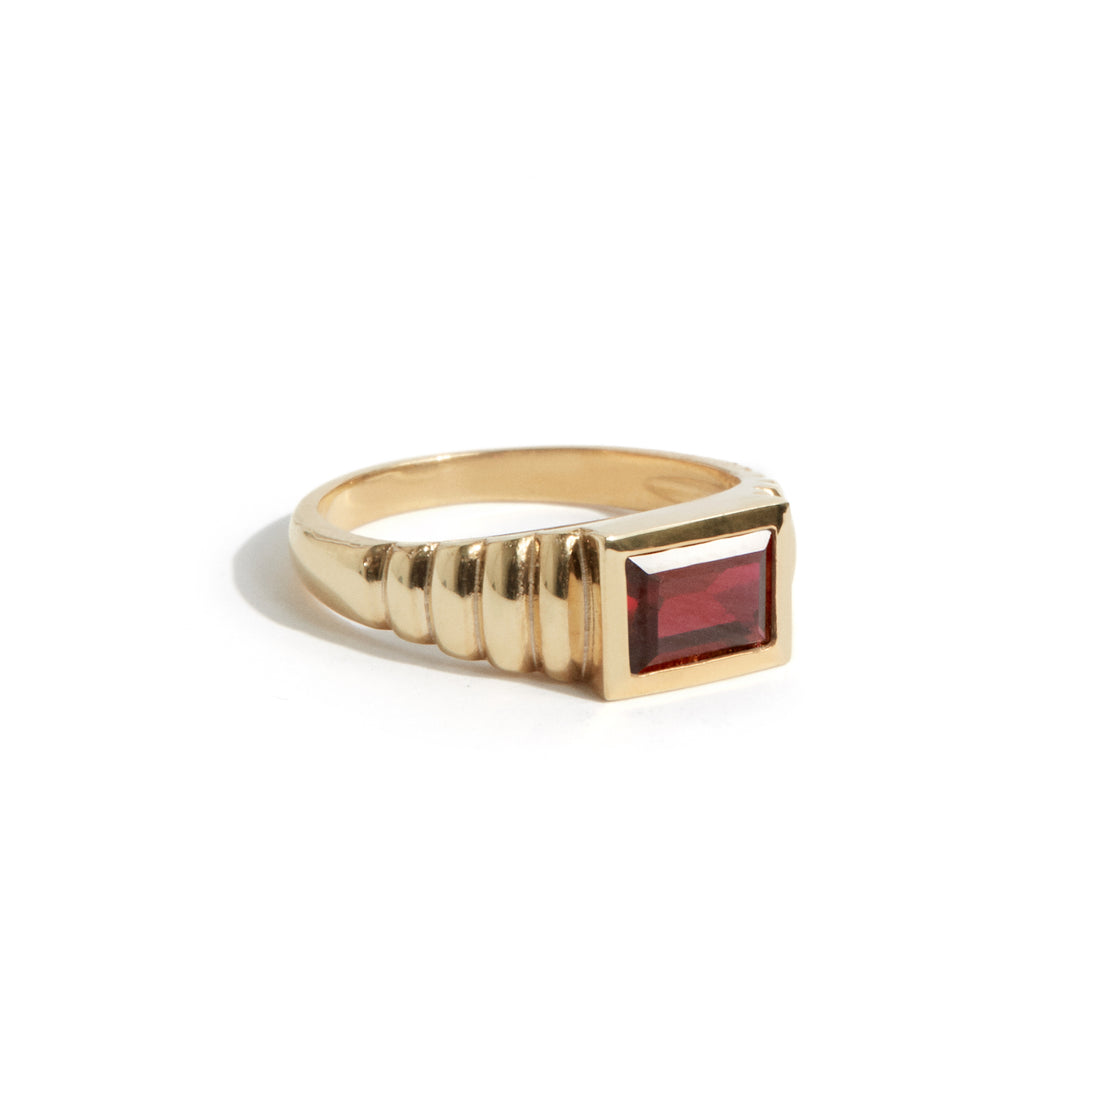 Ring - Art deco baguette (gold/red)